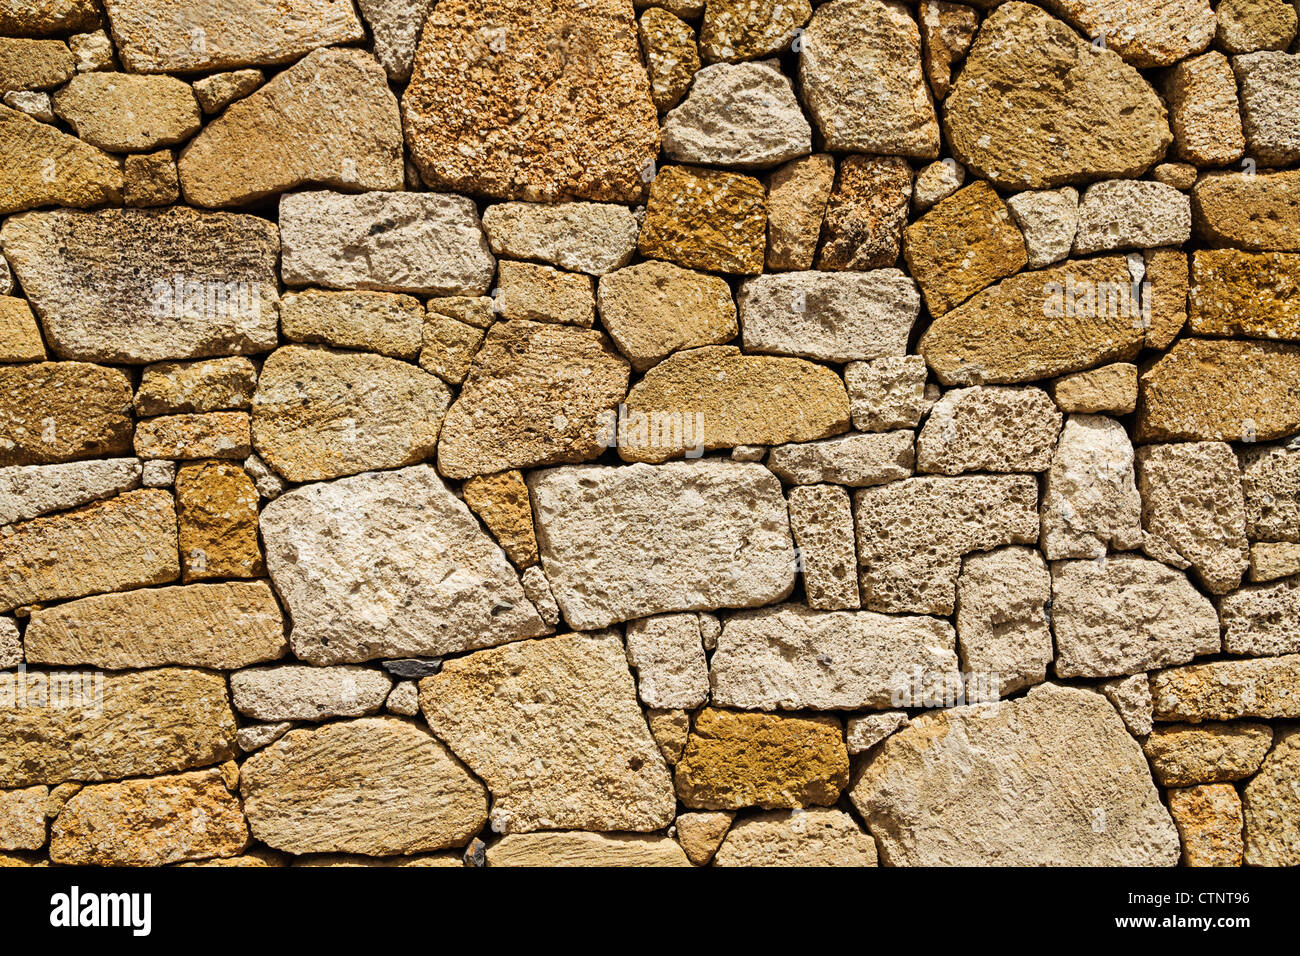 Dry Stone wall made from volcanic rocks on Tenerife, Canart Islands, Spain Stock Photo